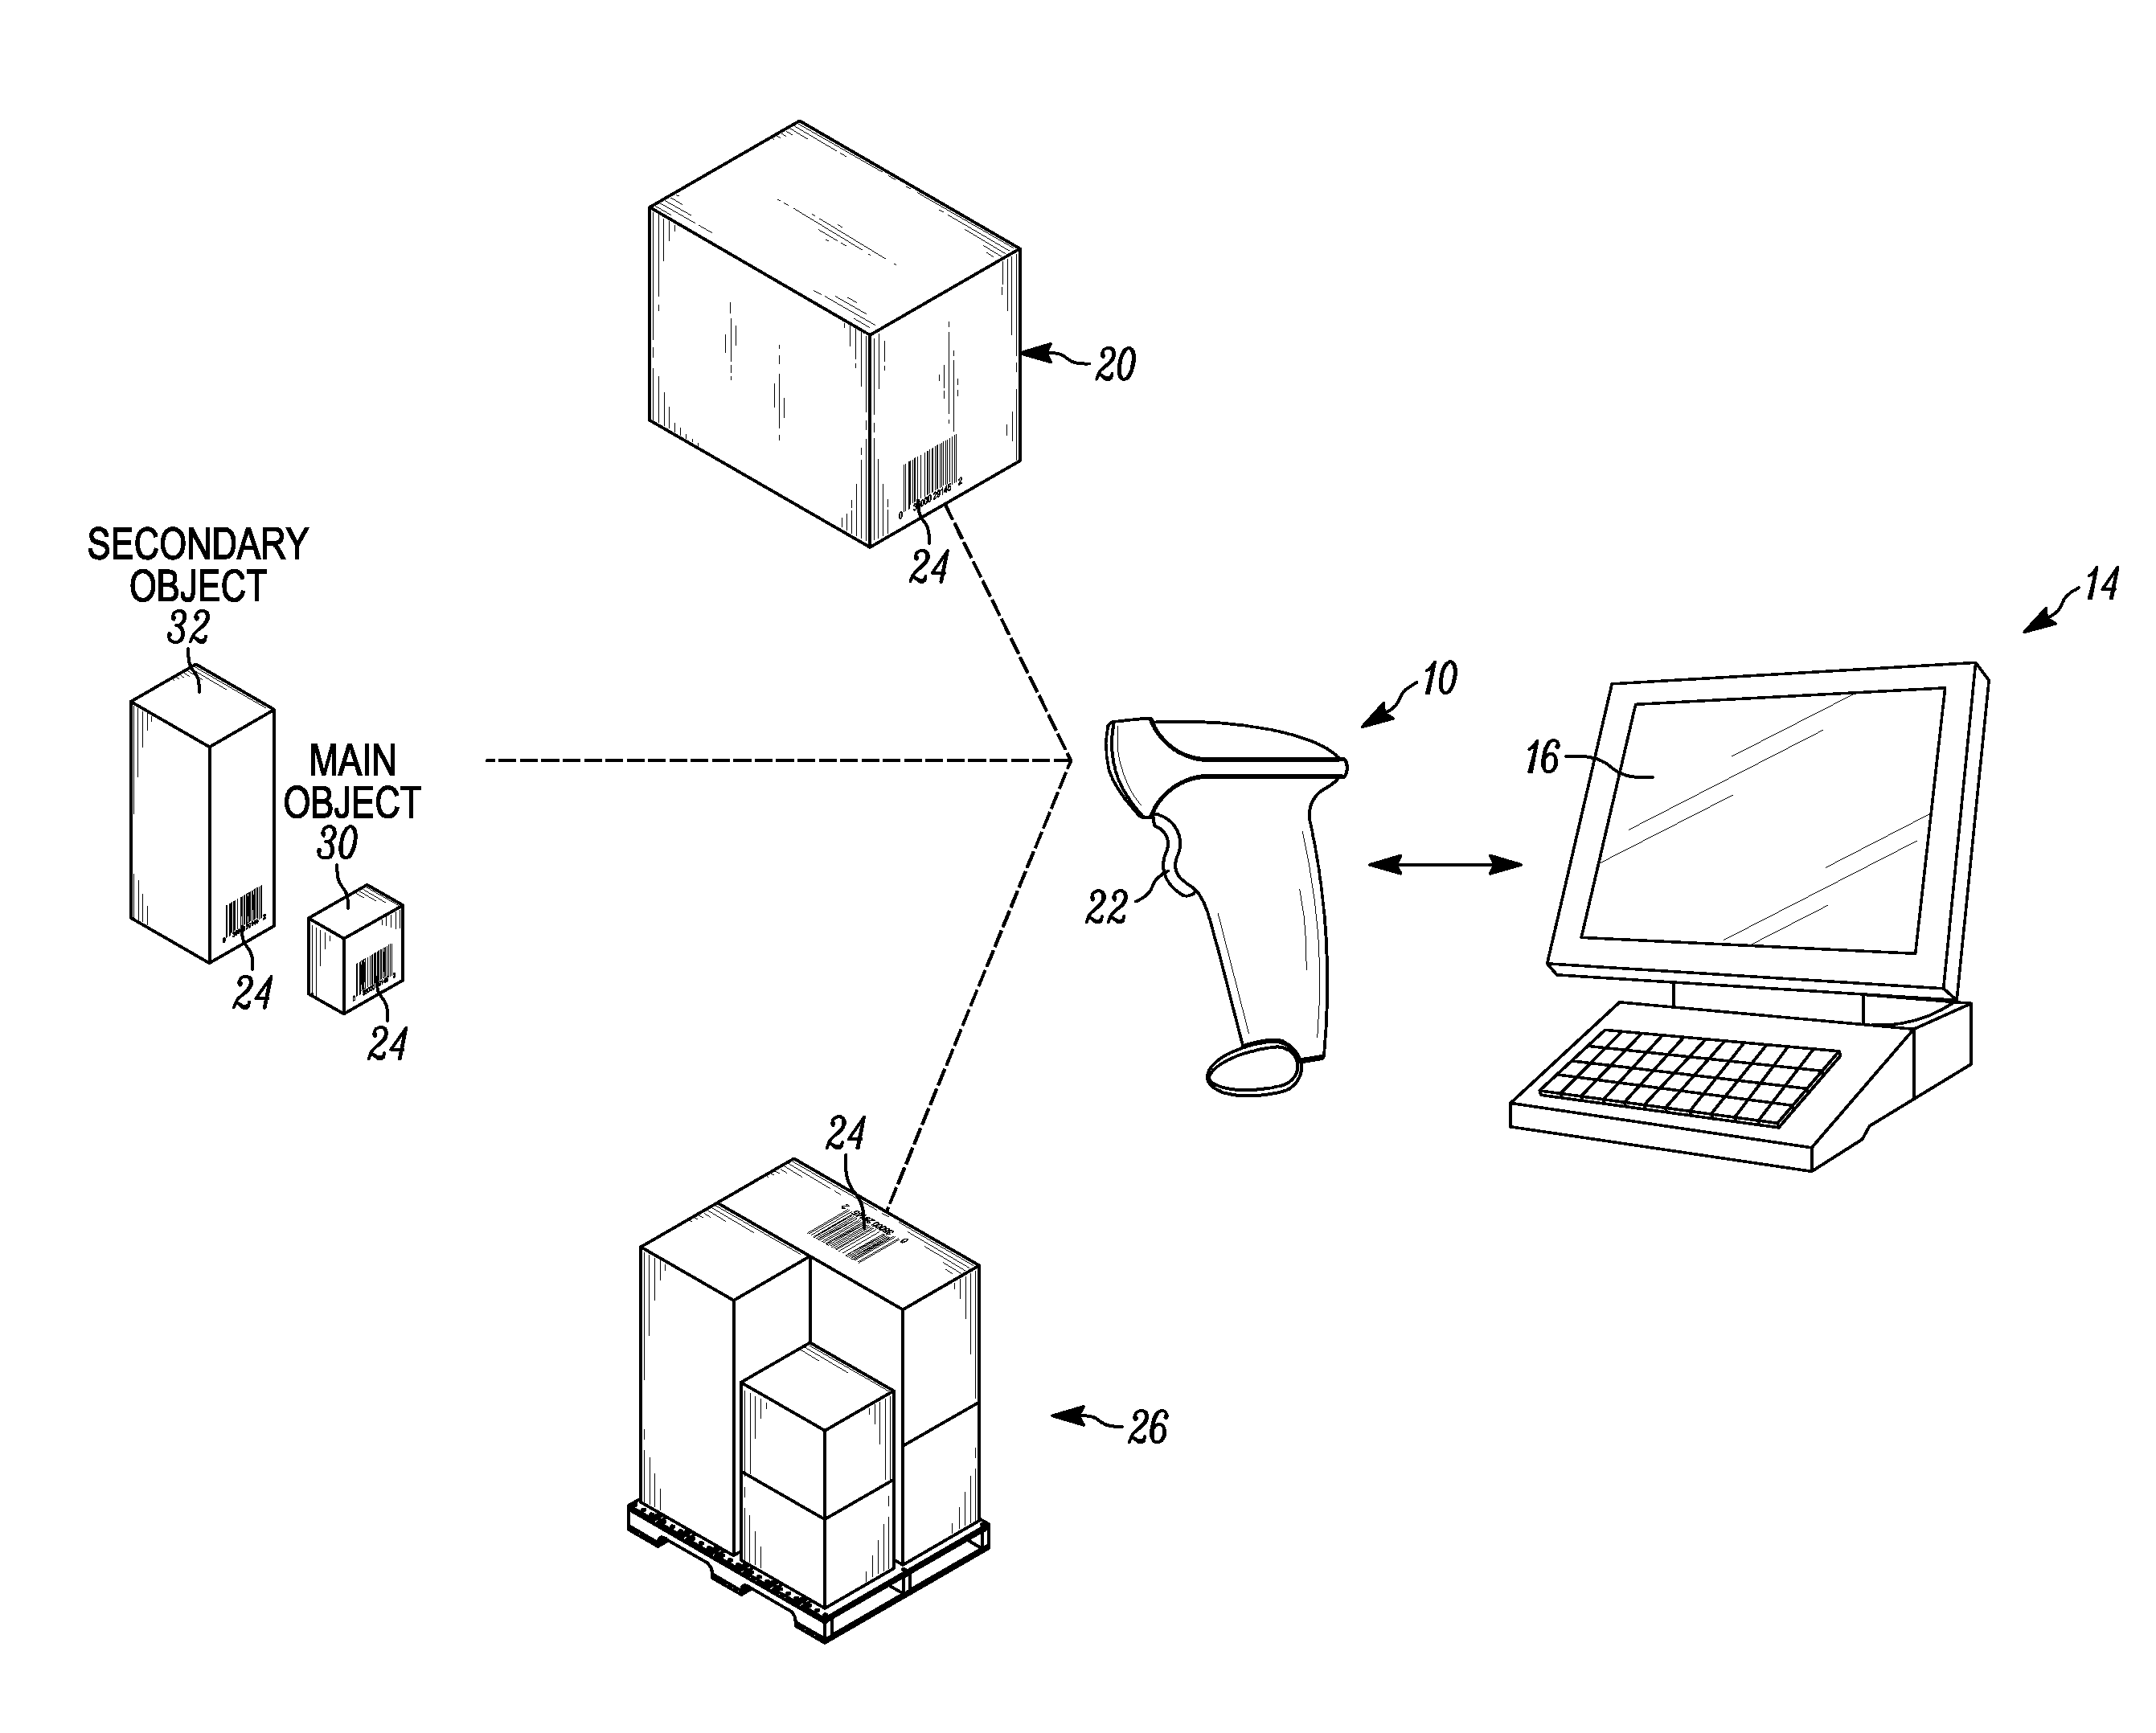 Apparatus for and method of estimating dimensions of an object associated with a code in automatic response to reading the code